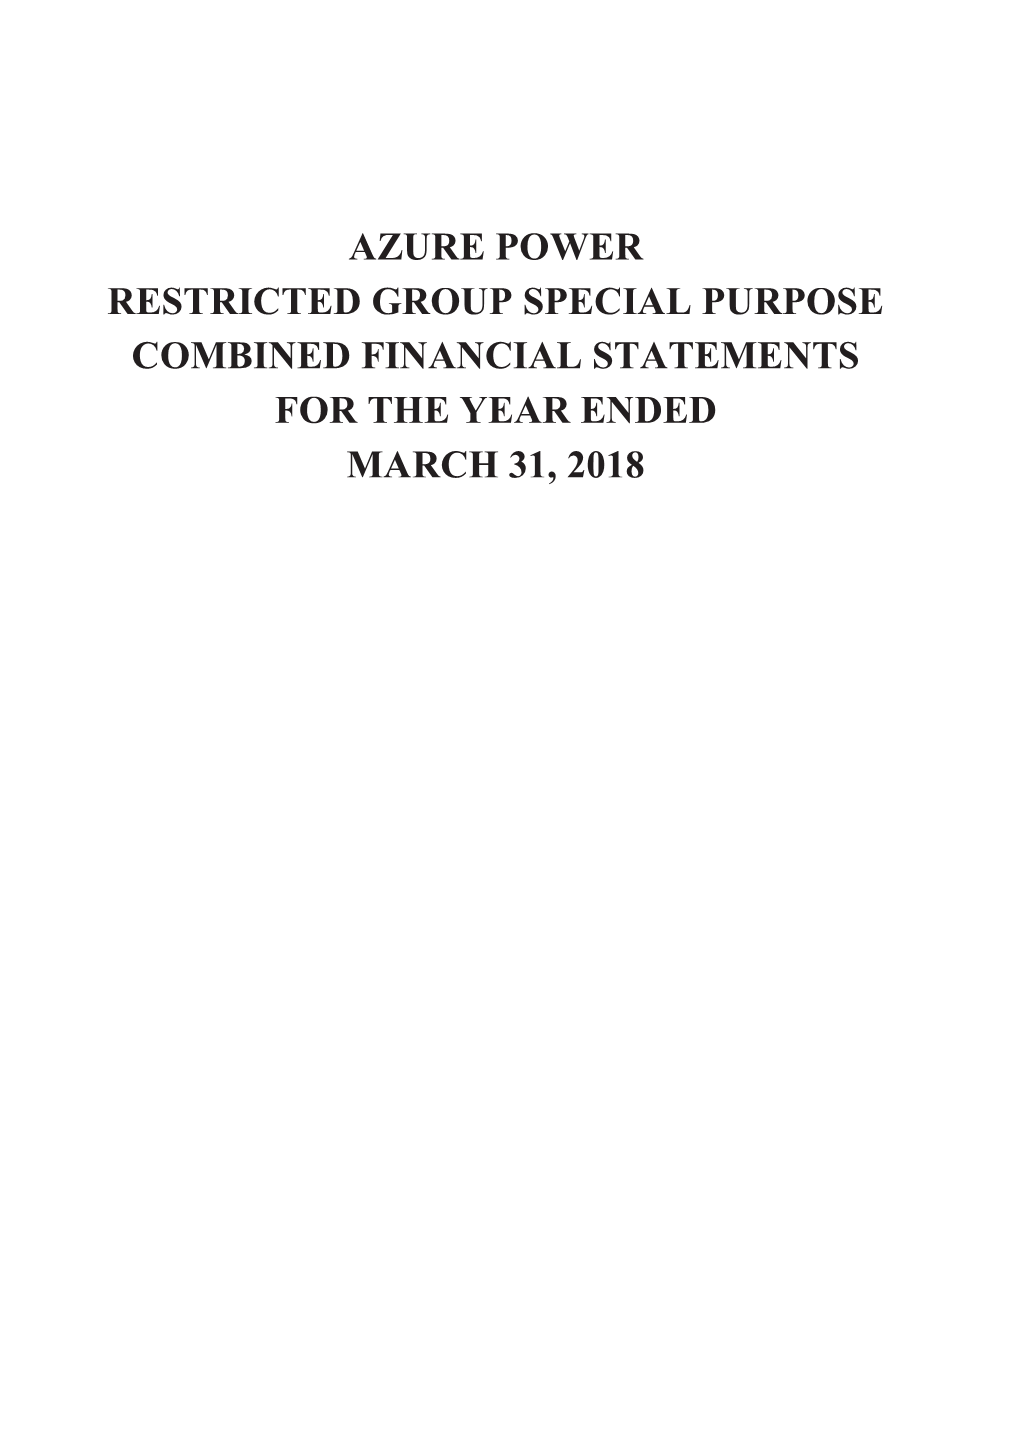 Azure Power Restricted Group Special Purpose Combined Financial Statements for the Year Ended March 31, 2018